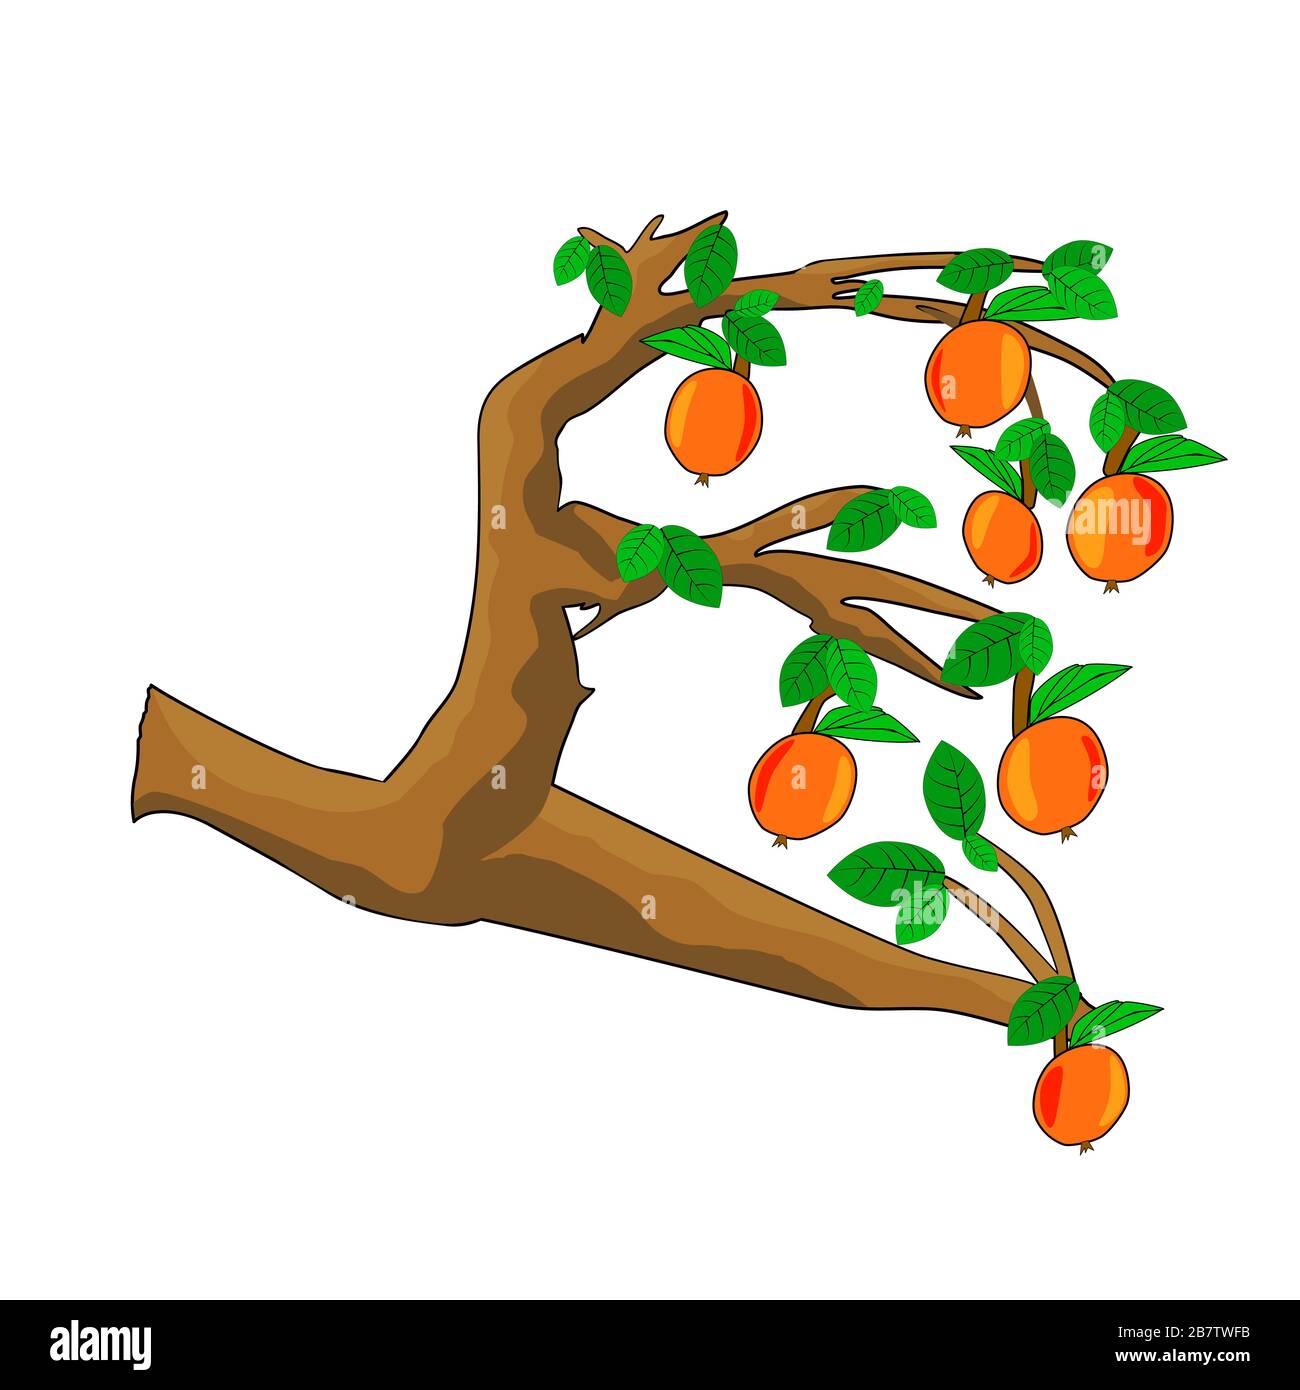 Apples On Tree Branch With Green Leaves Isolated On White Background Cartoon Style Drawing Of Hanging Fruit On Branches Stock Vector Illustration Stock Vector Image Art Alamy